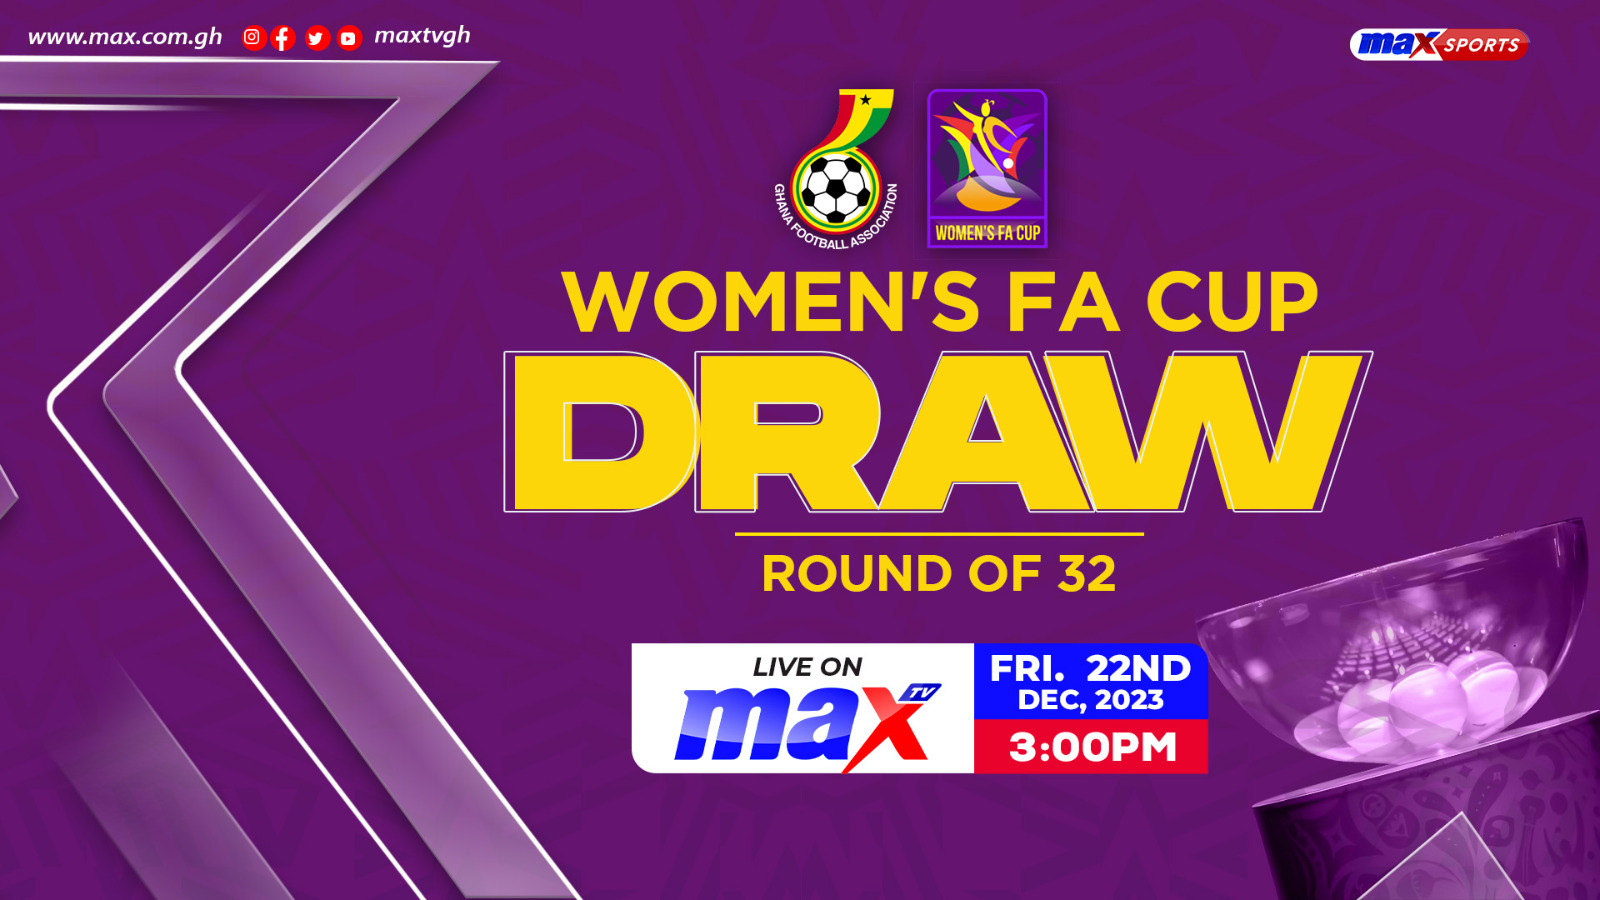 2023/24 Women’s FA Cup: Round of 32 draw to be held on December 22